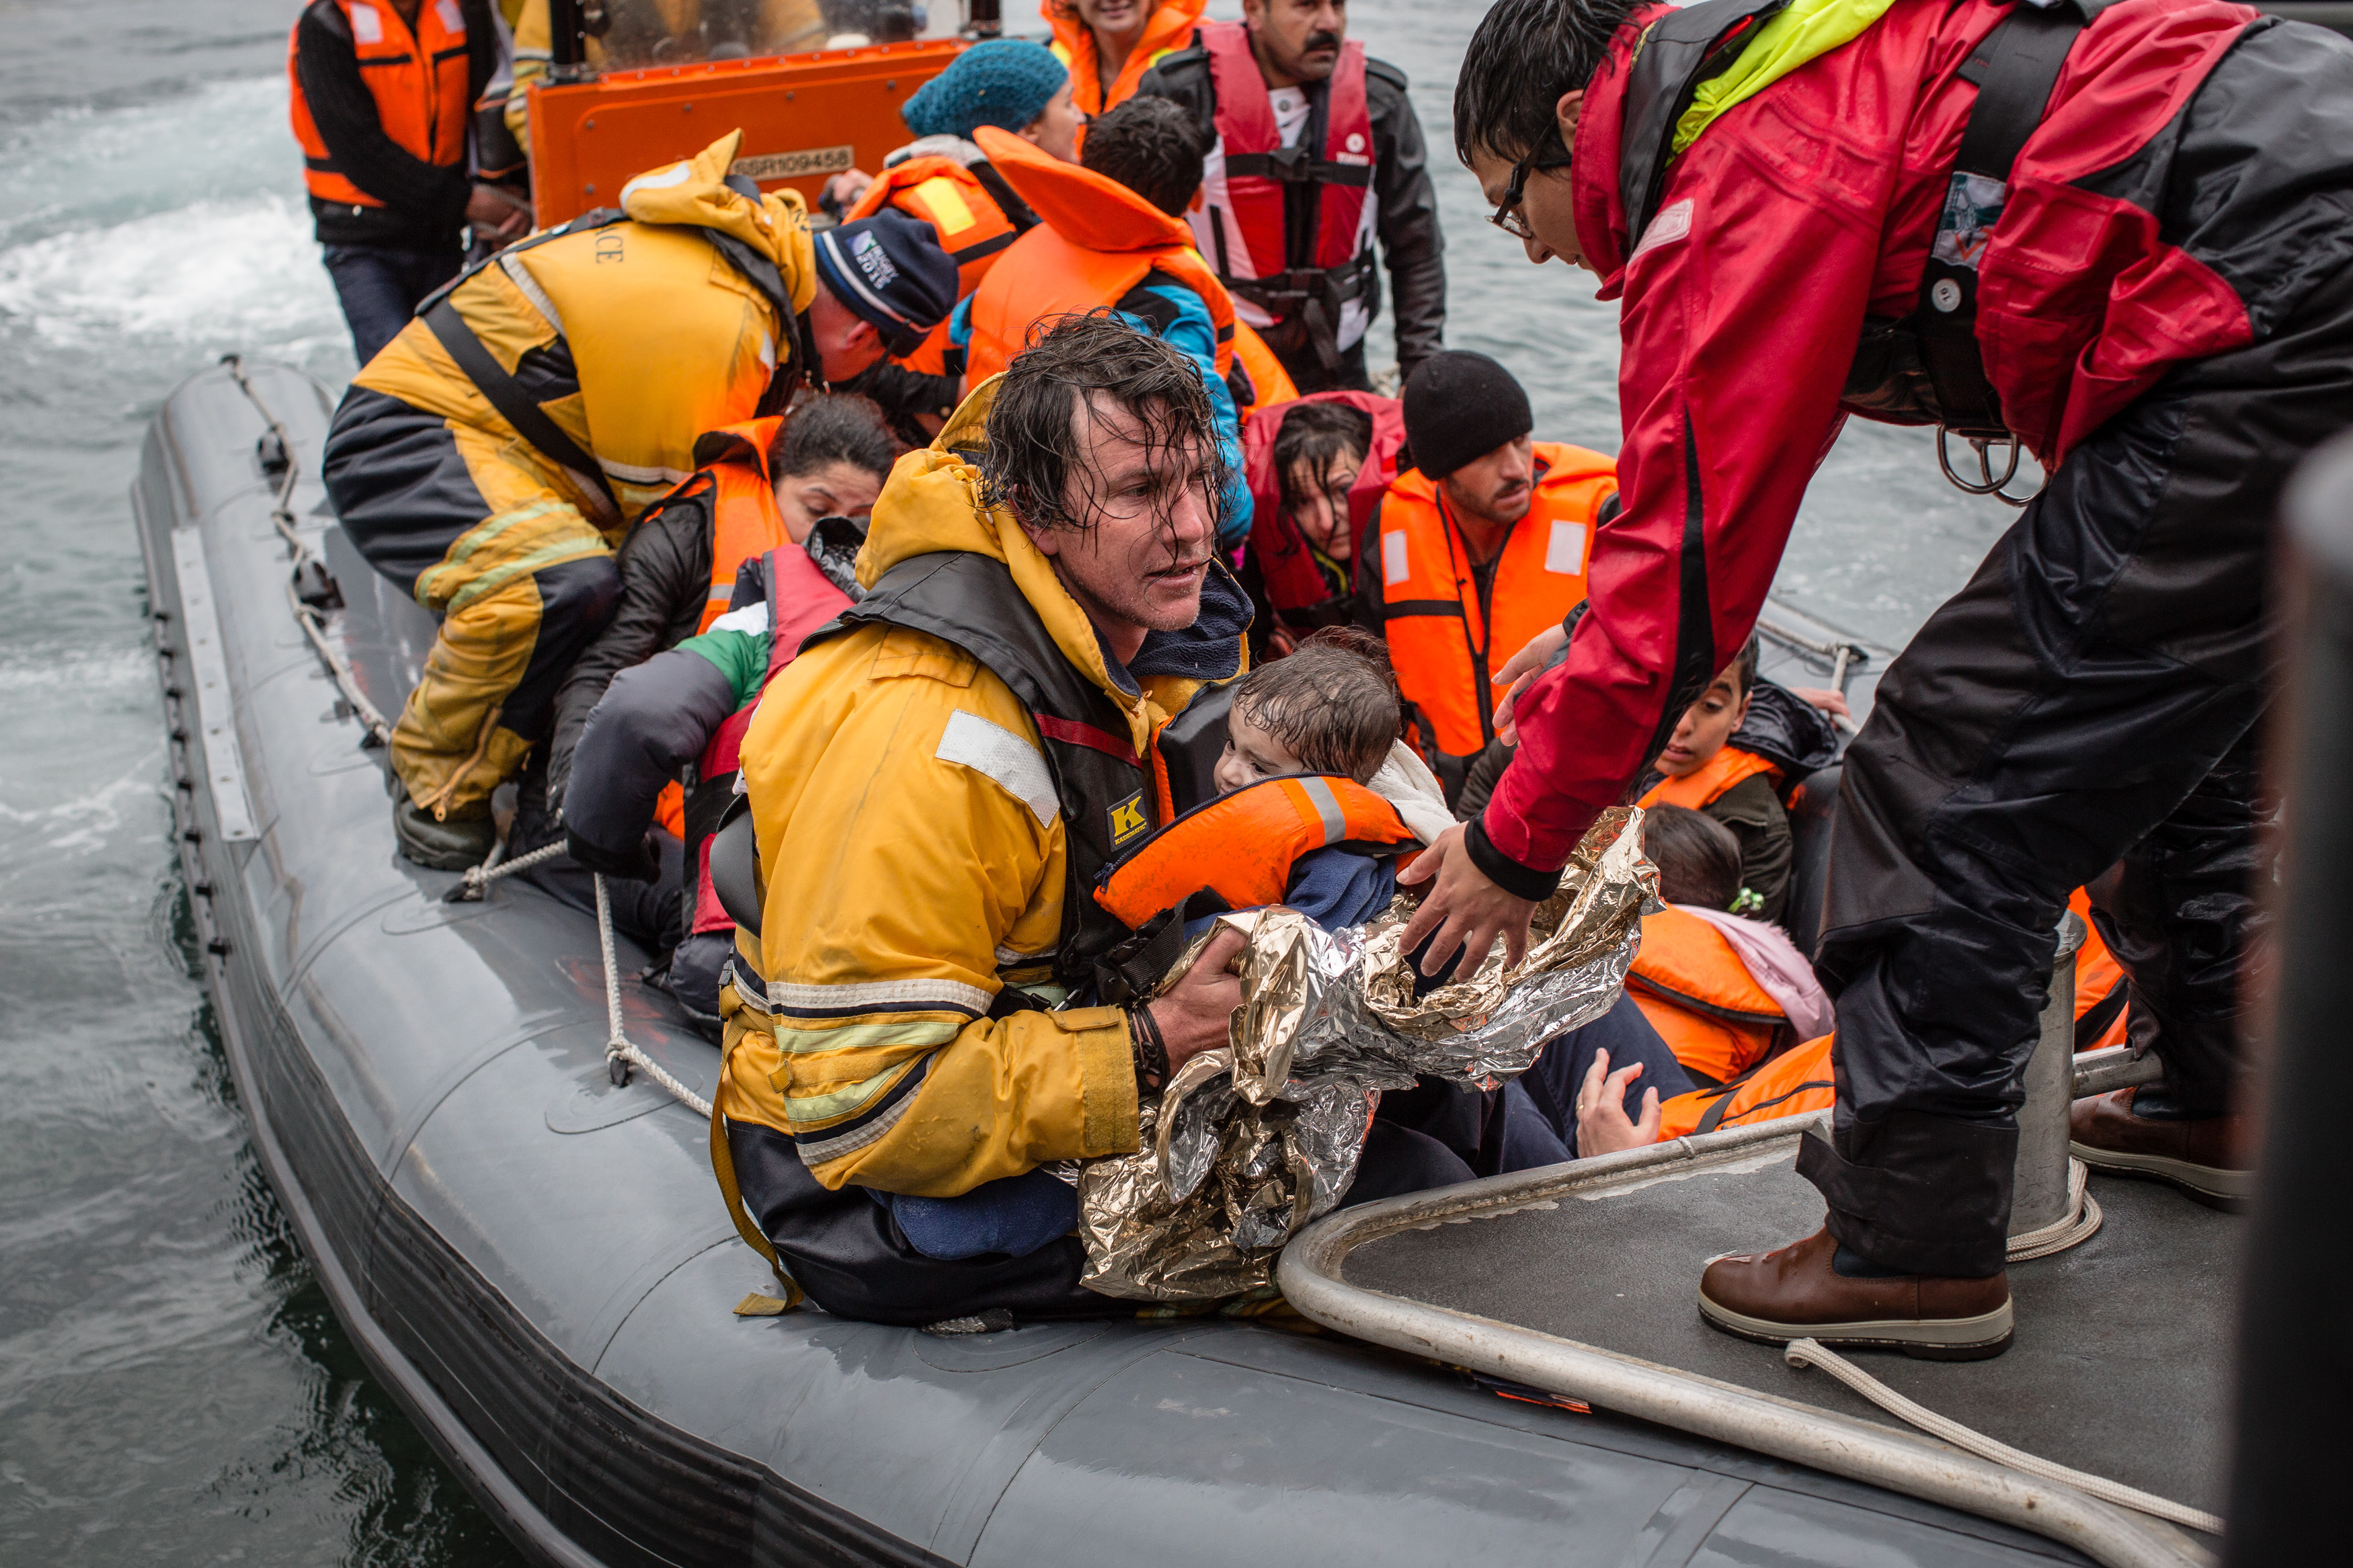 A boat of refugees about the reach the Greek coast (by Doctors Without Borders)